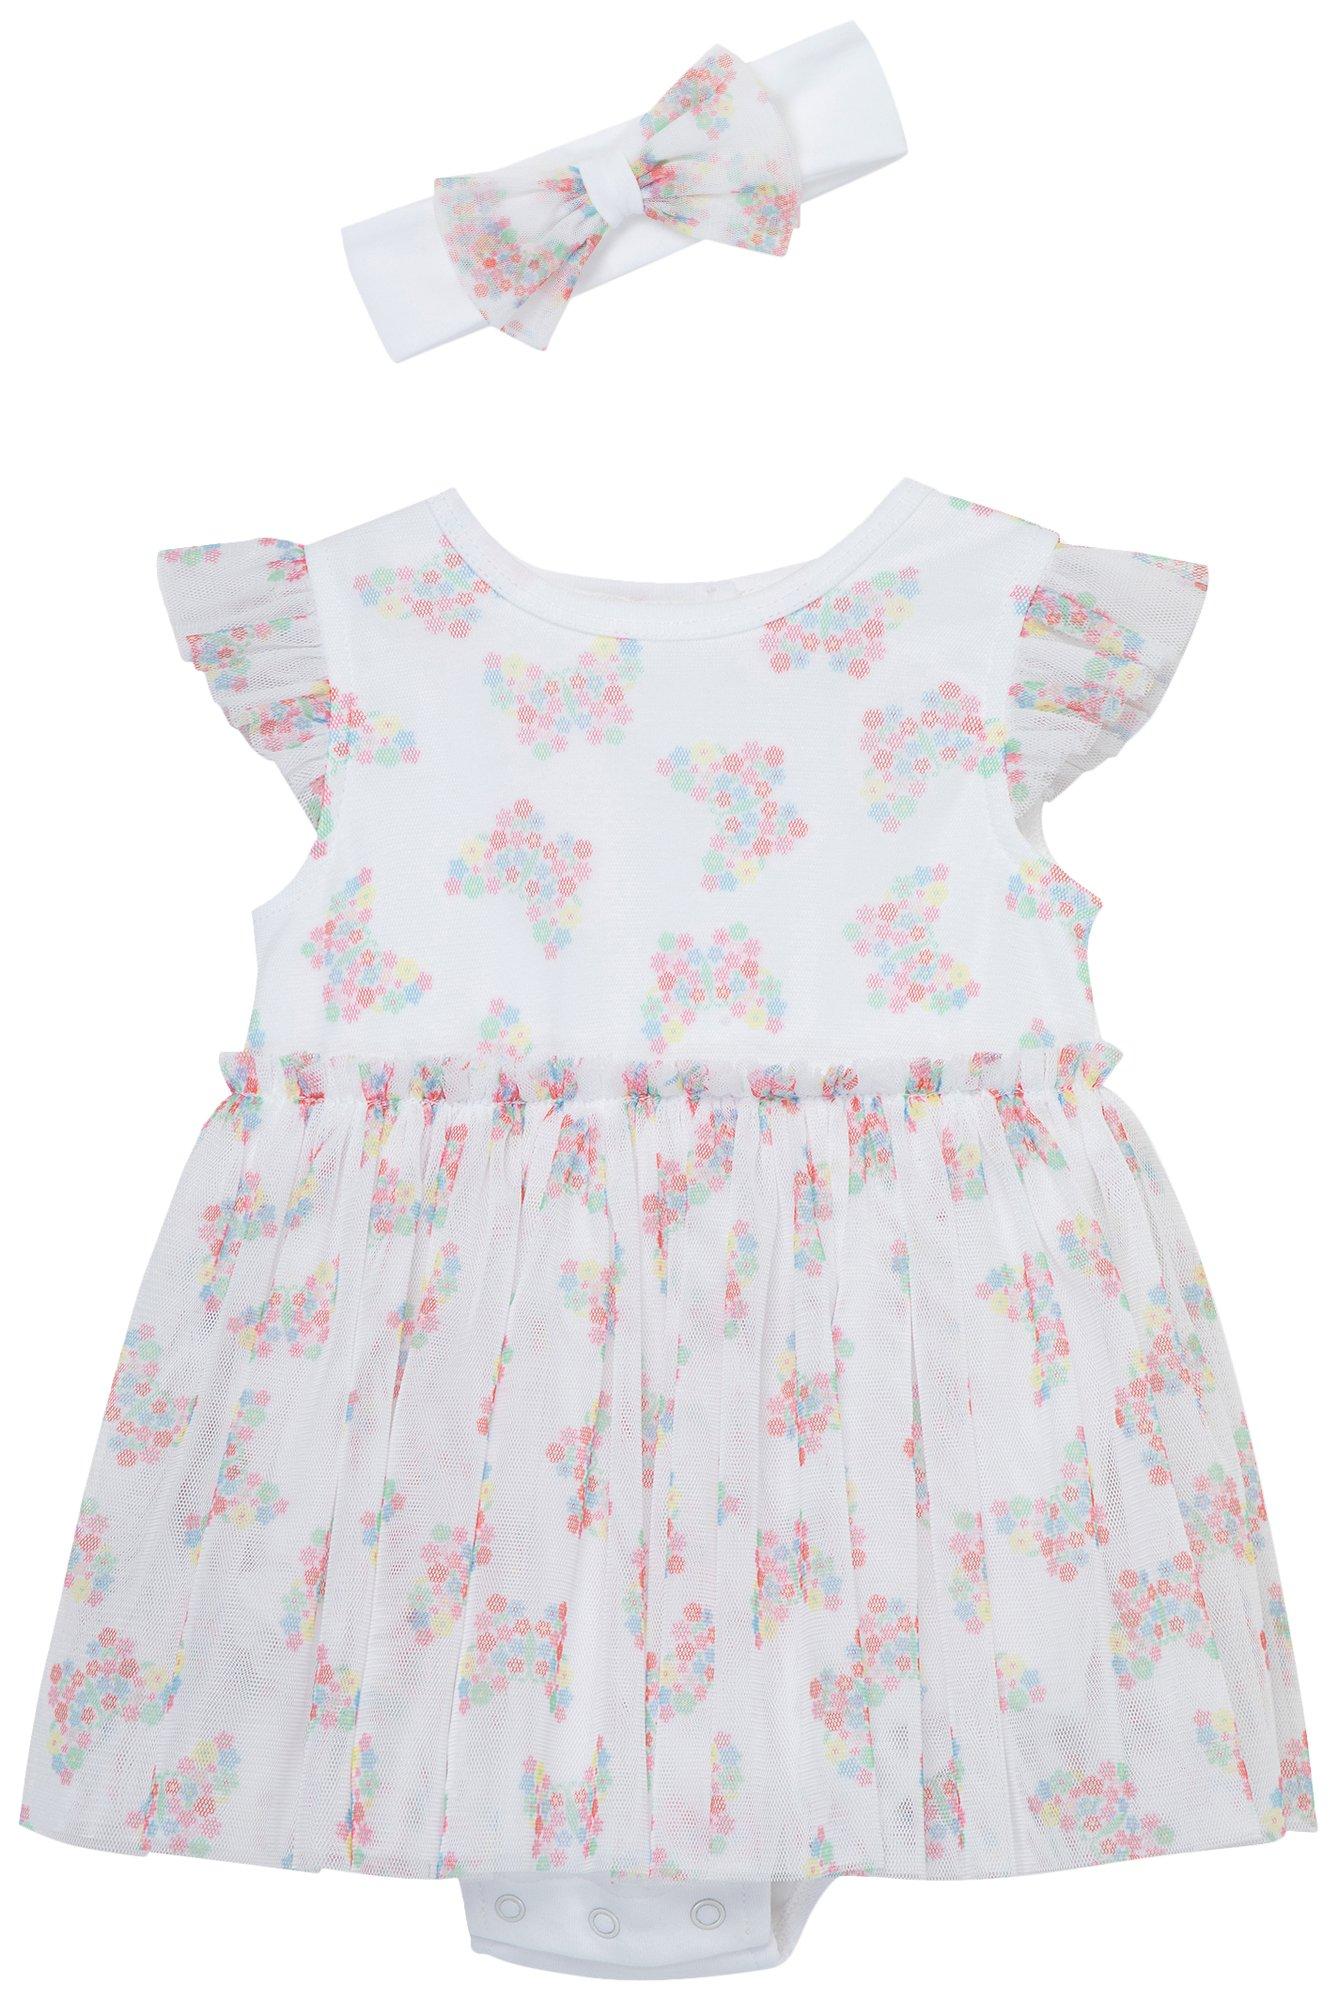 Little Me Baby Girls 2 Pc. Butterfly Popover